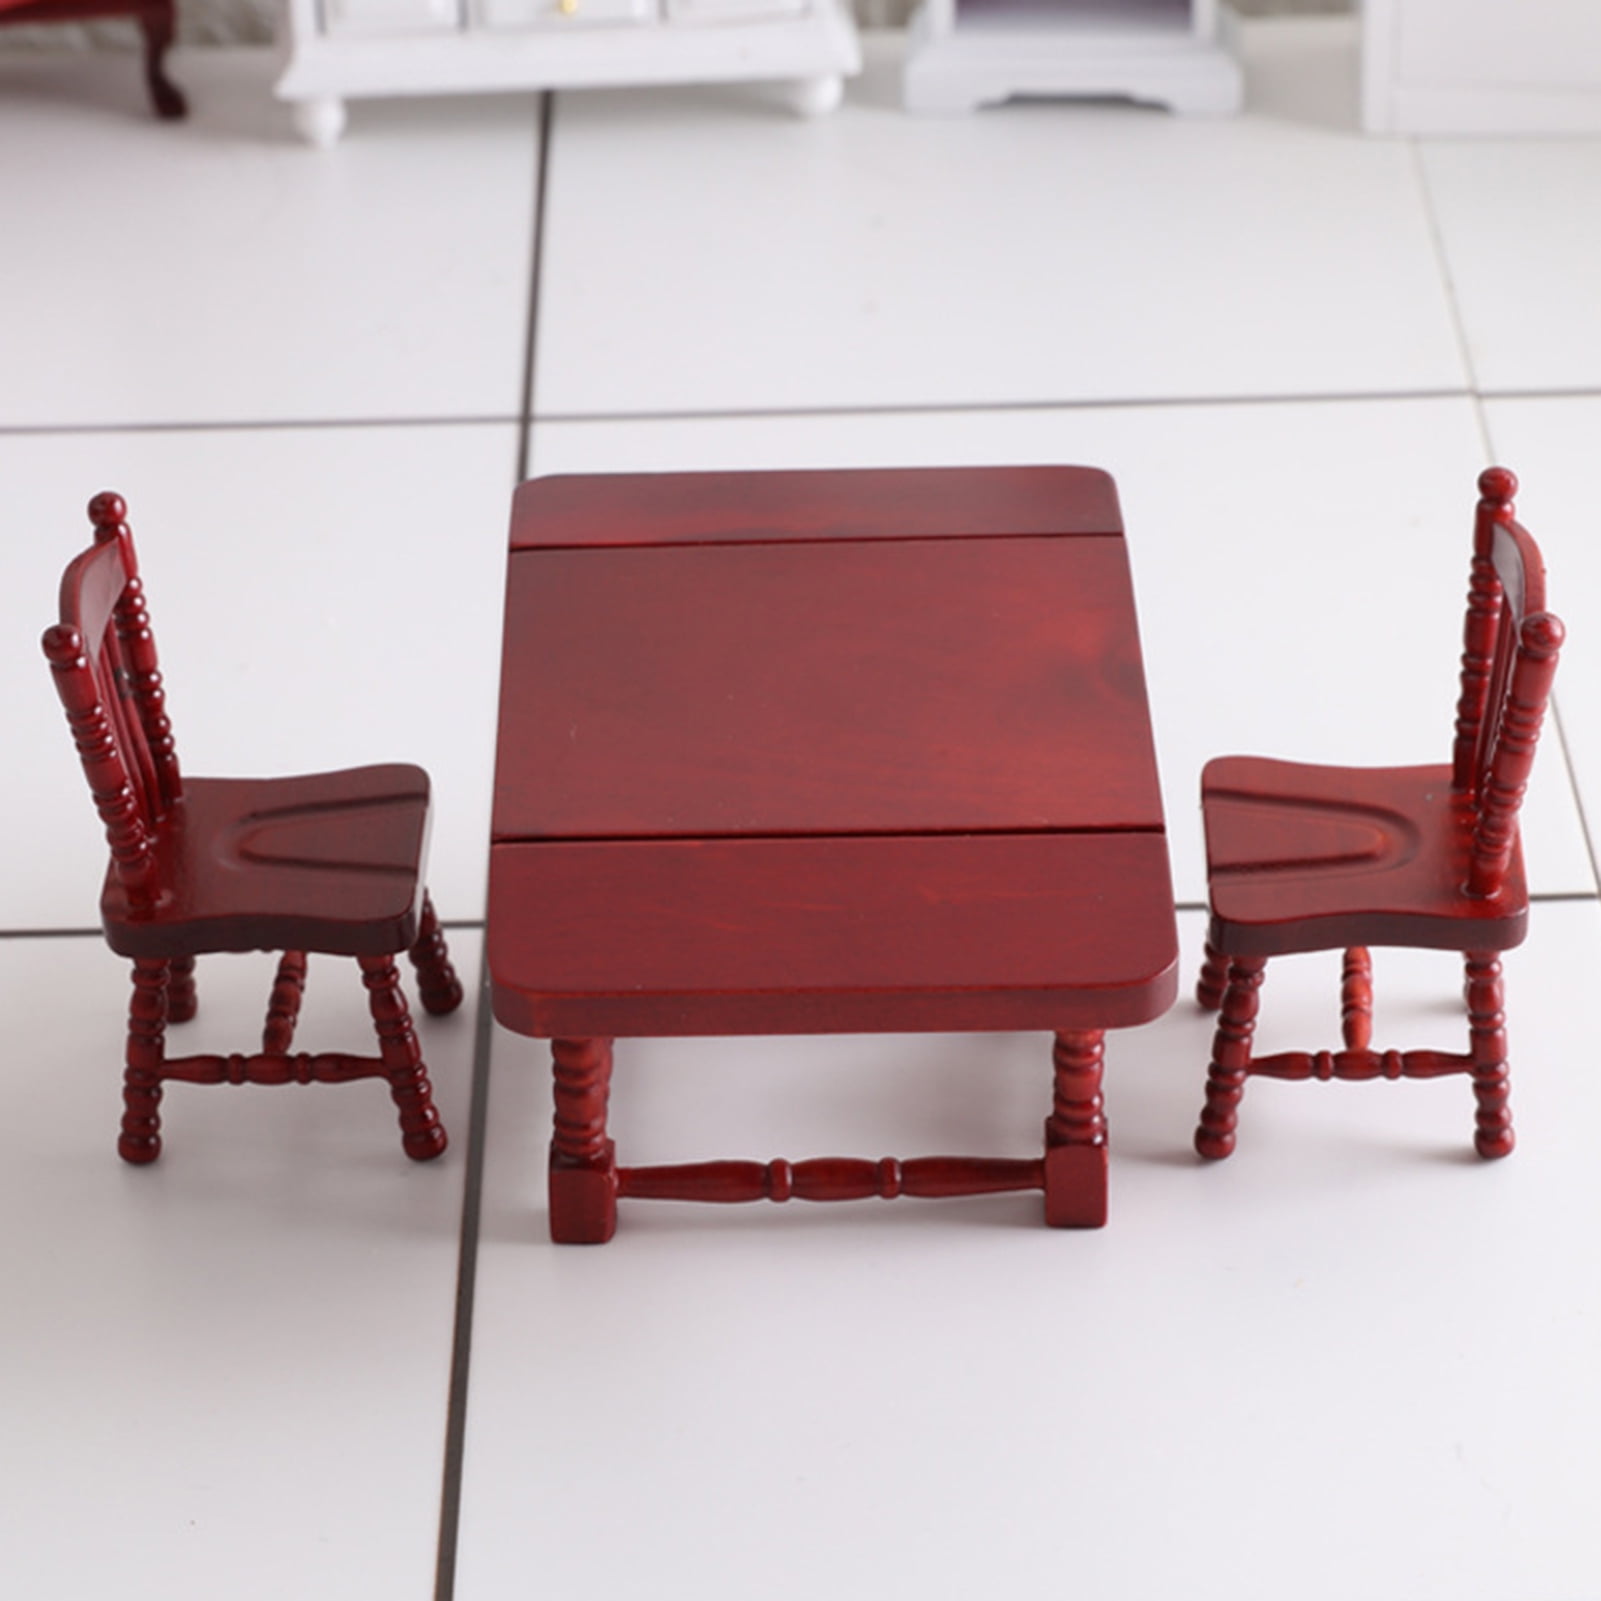 RedmL Birch Folding Table Chair Model Accessories Decor Craft Gift for 1/12  Doll House